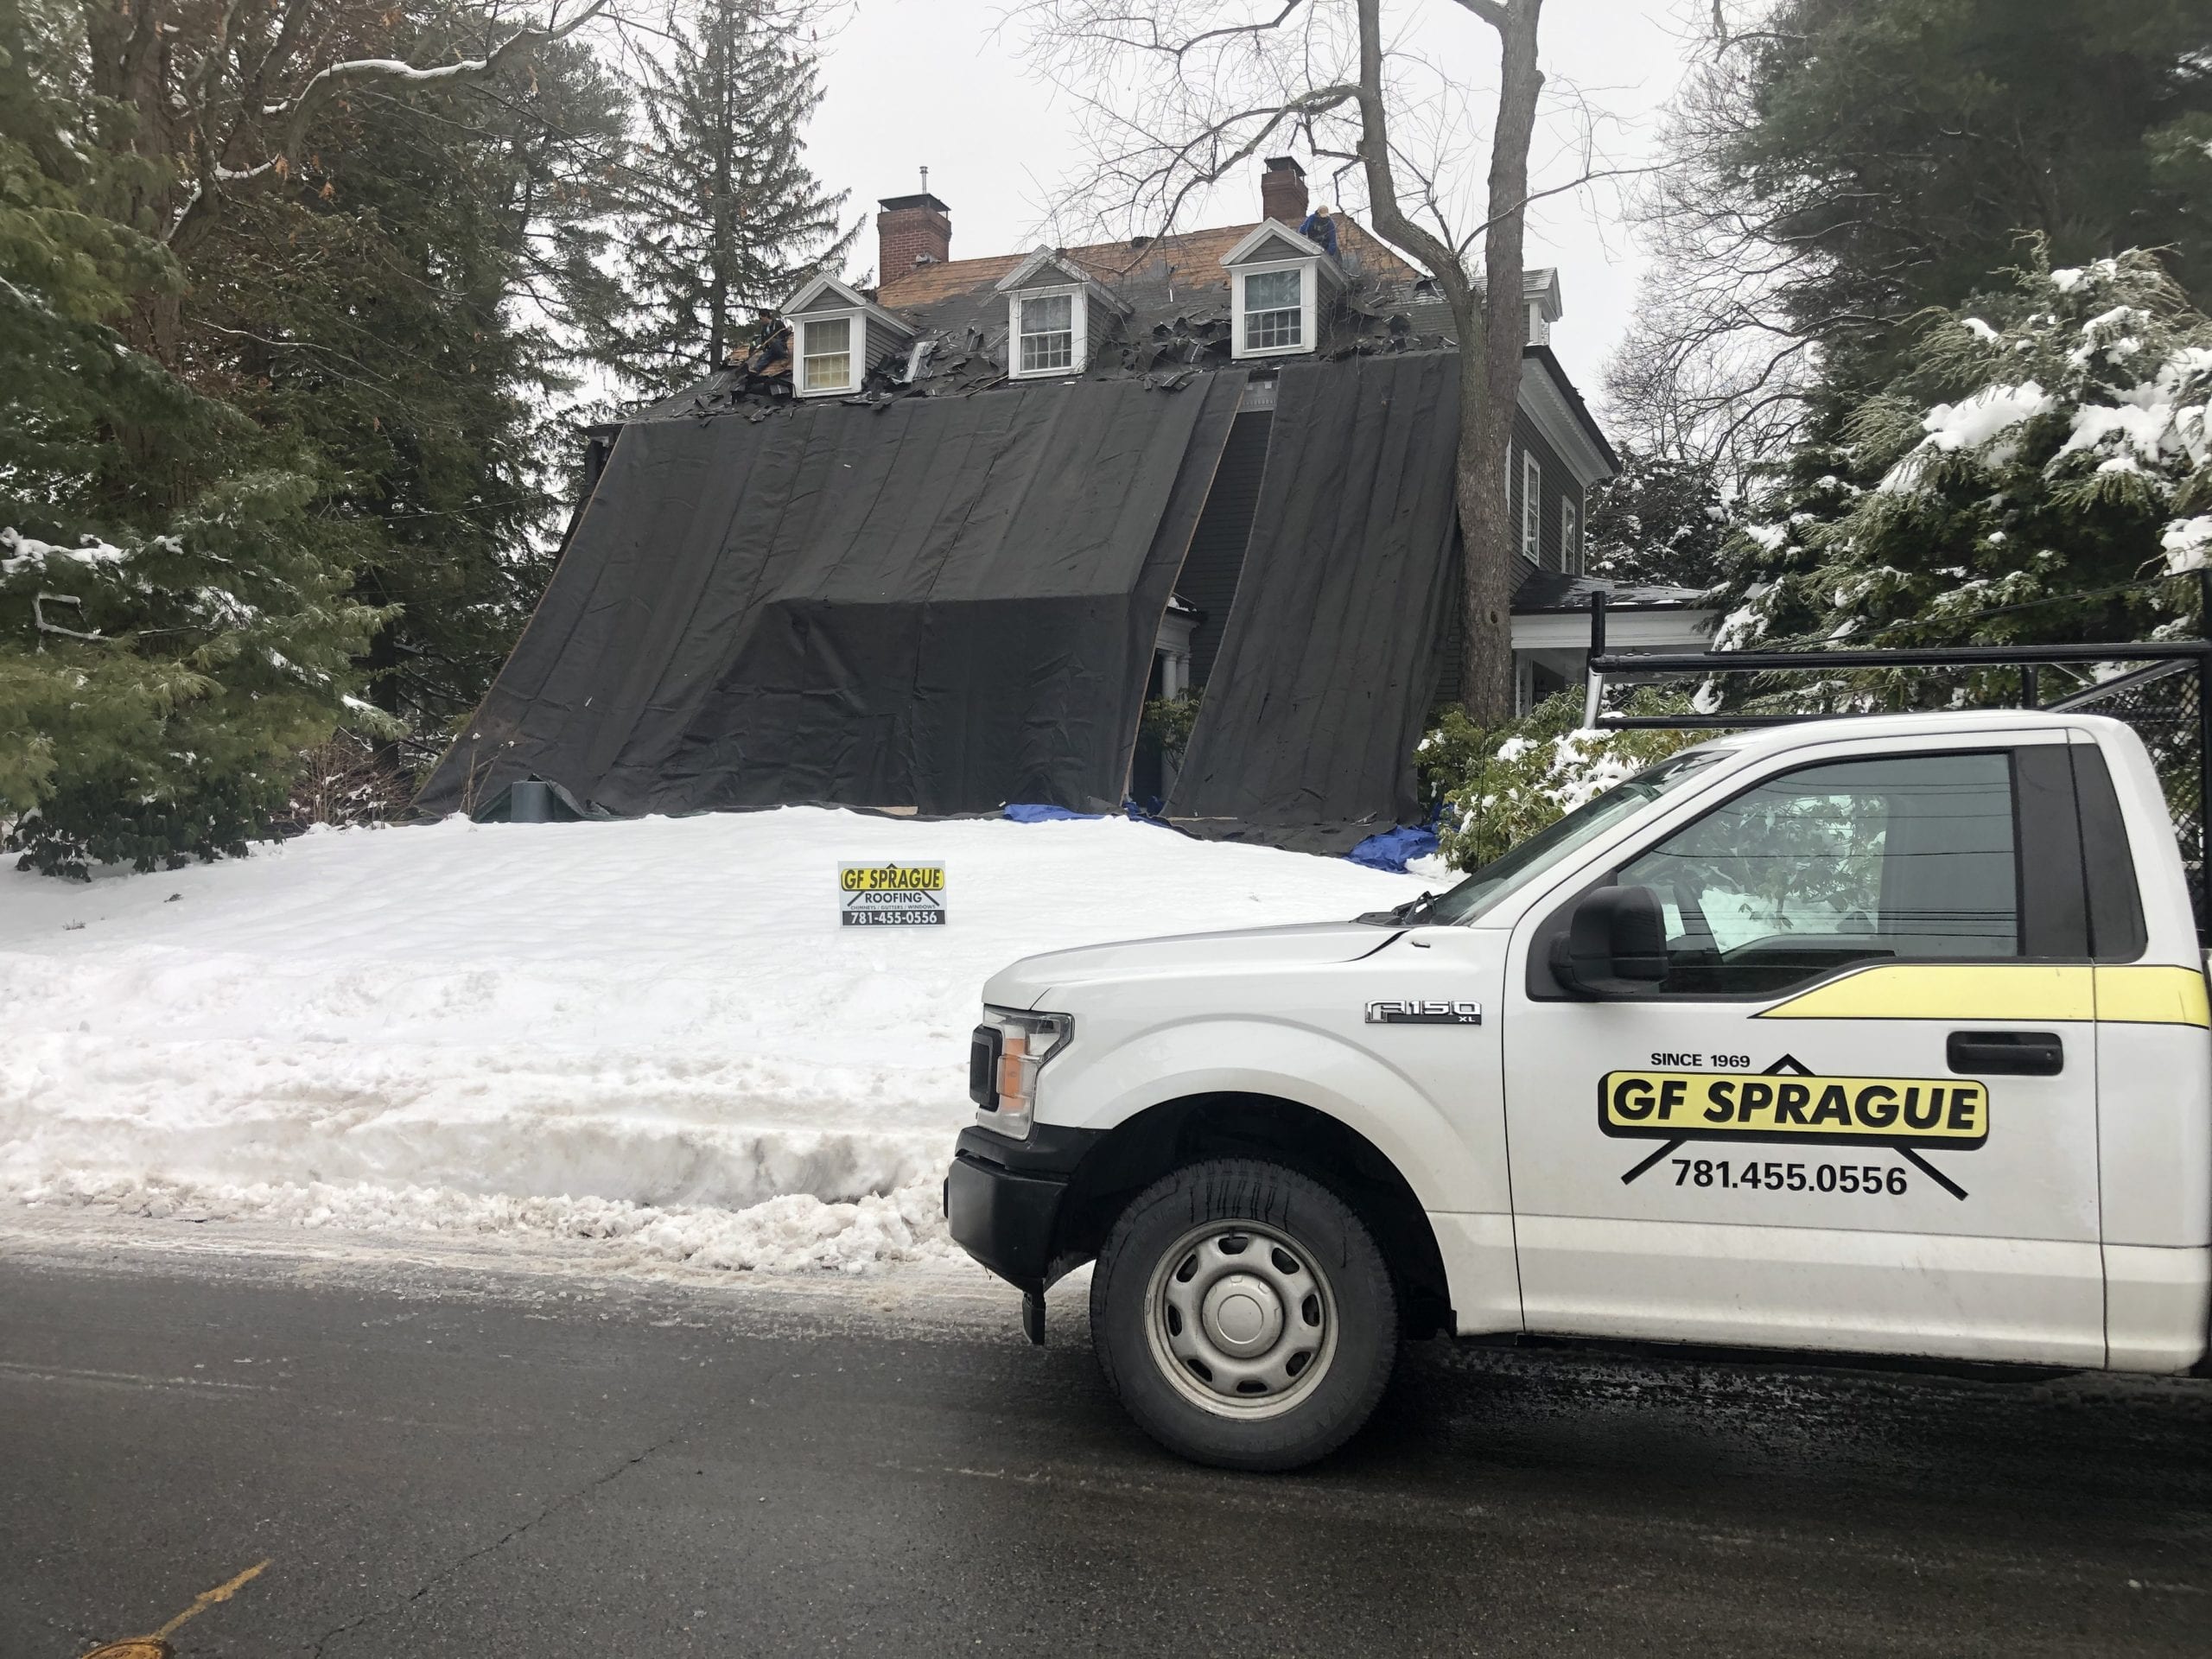 Our team protecting the shrubbery while replacing the asphalt shingle roof.